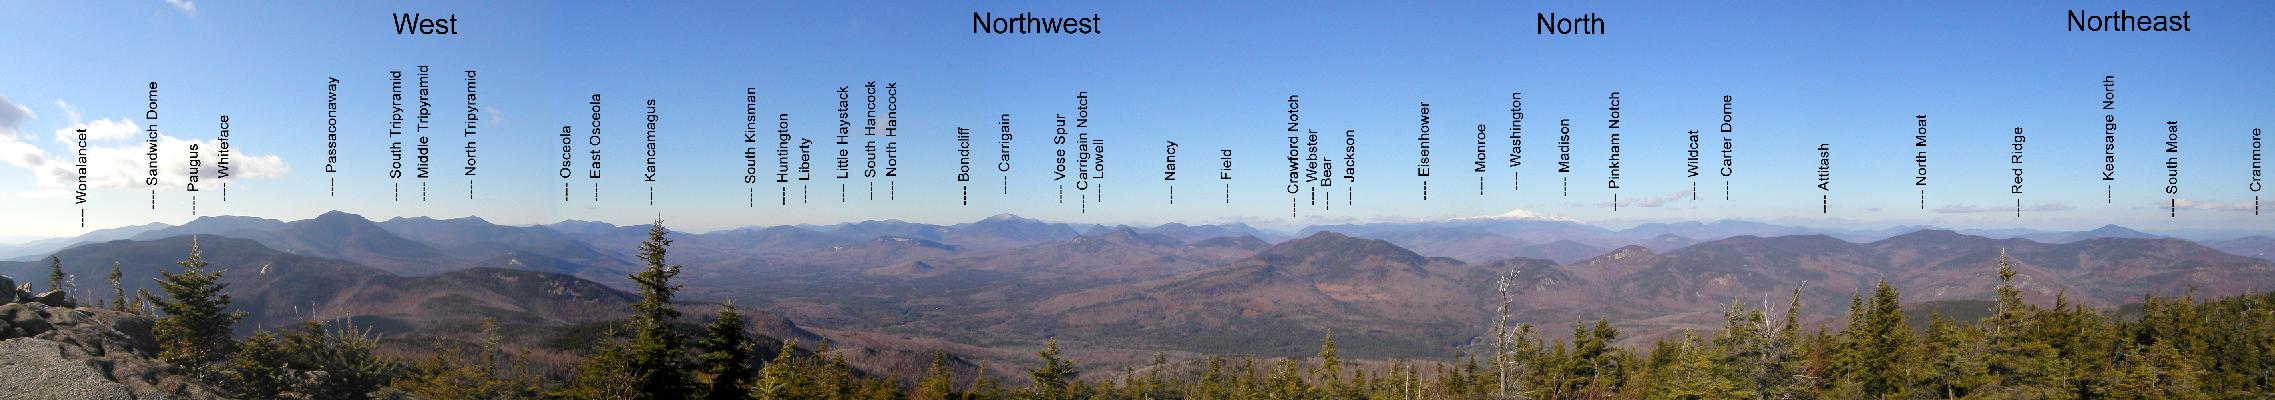 A view of the White Mountains as seen from the summit of Middle Sister Mountain in NH on November 200